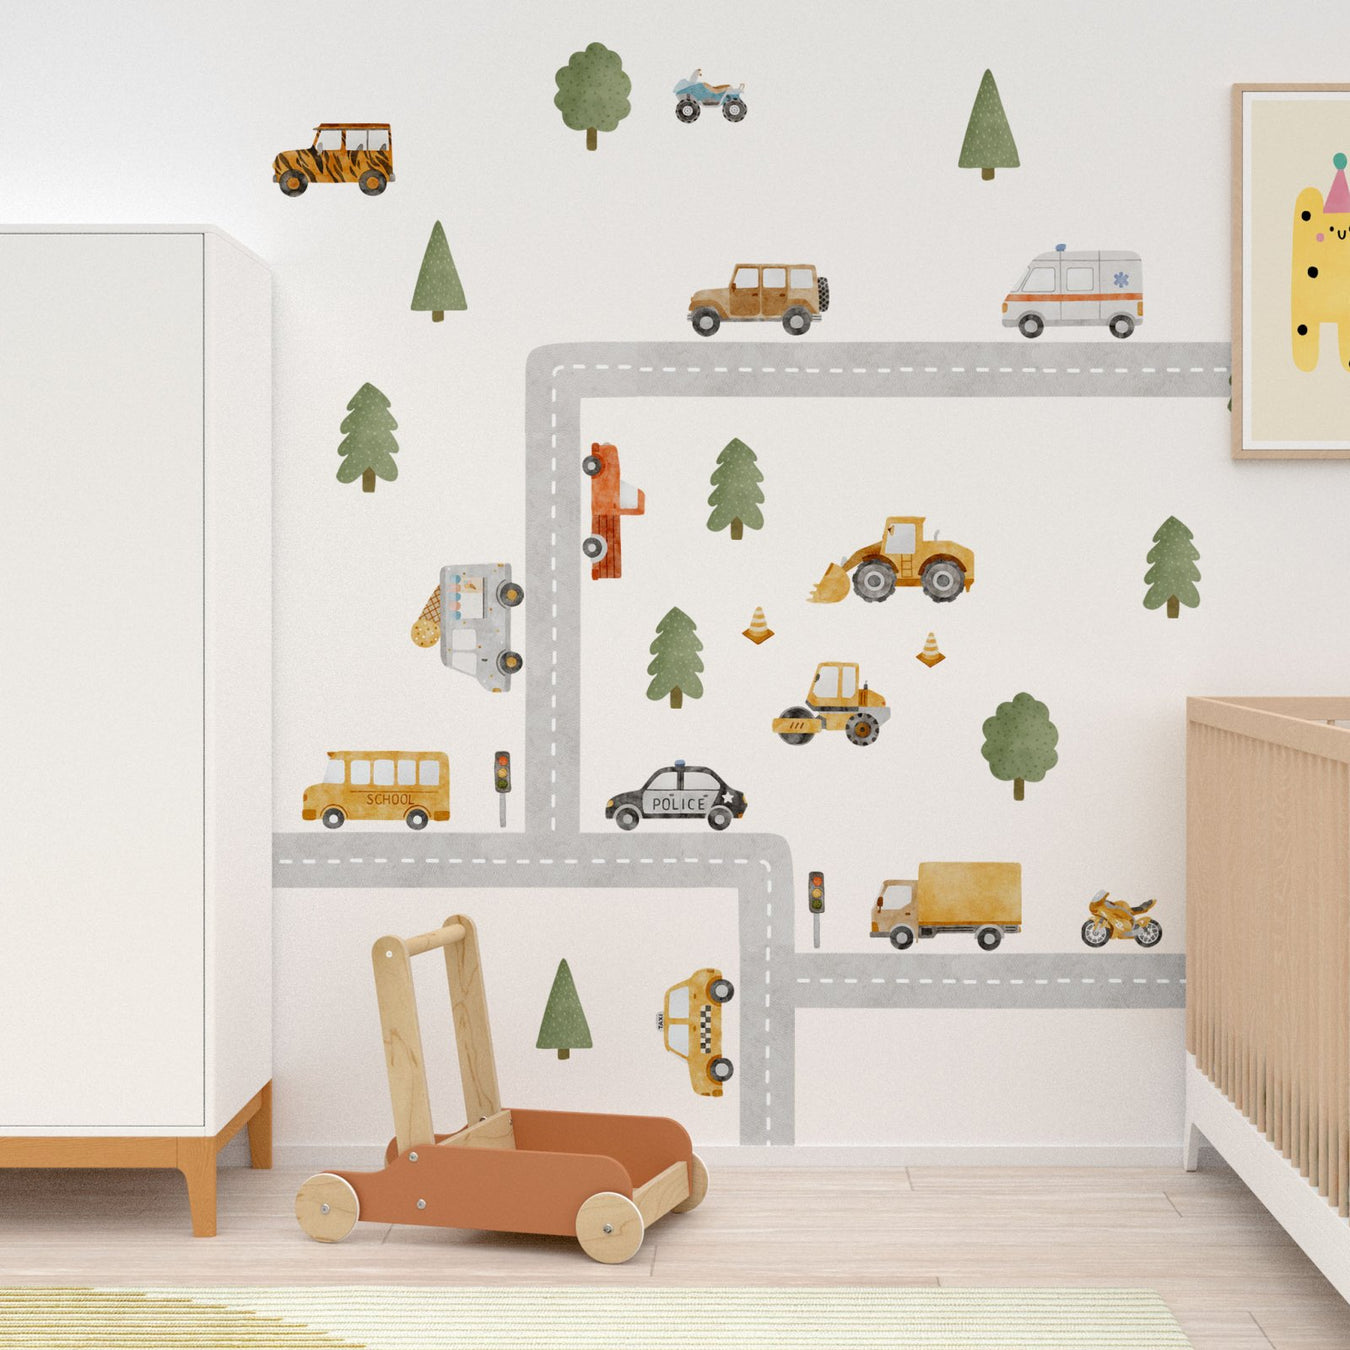 All our Wall Stickers